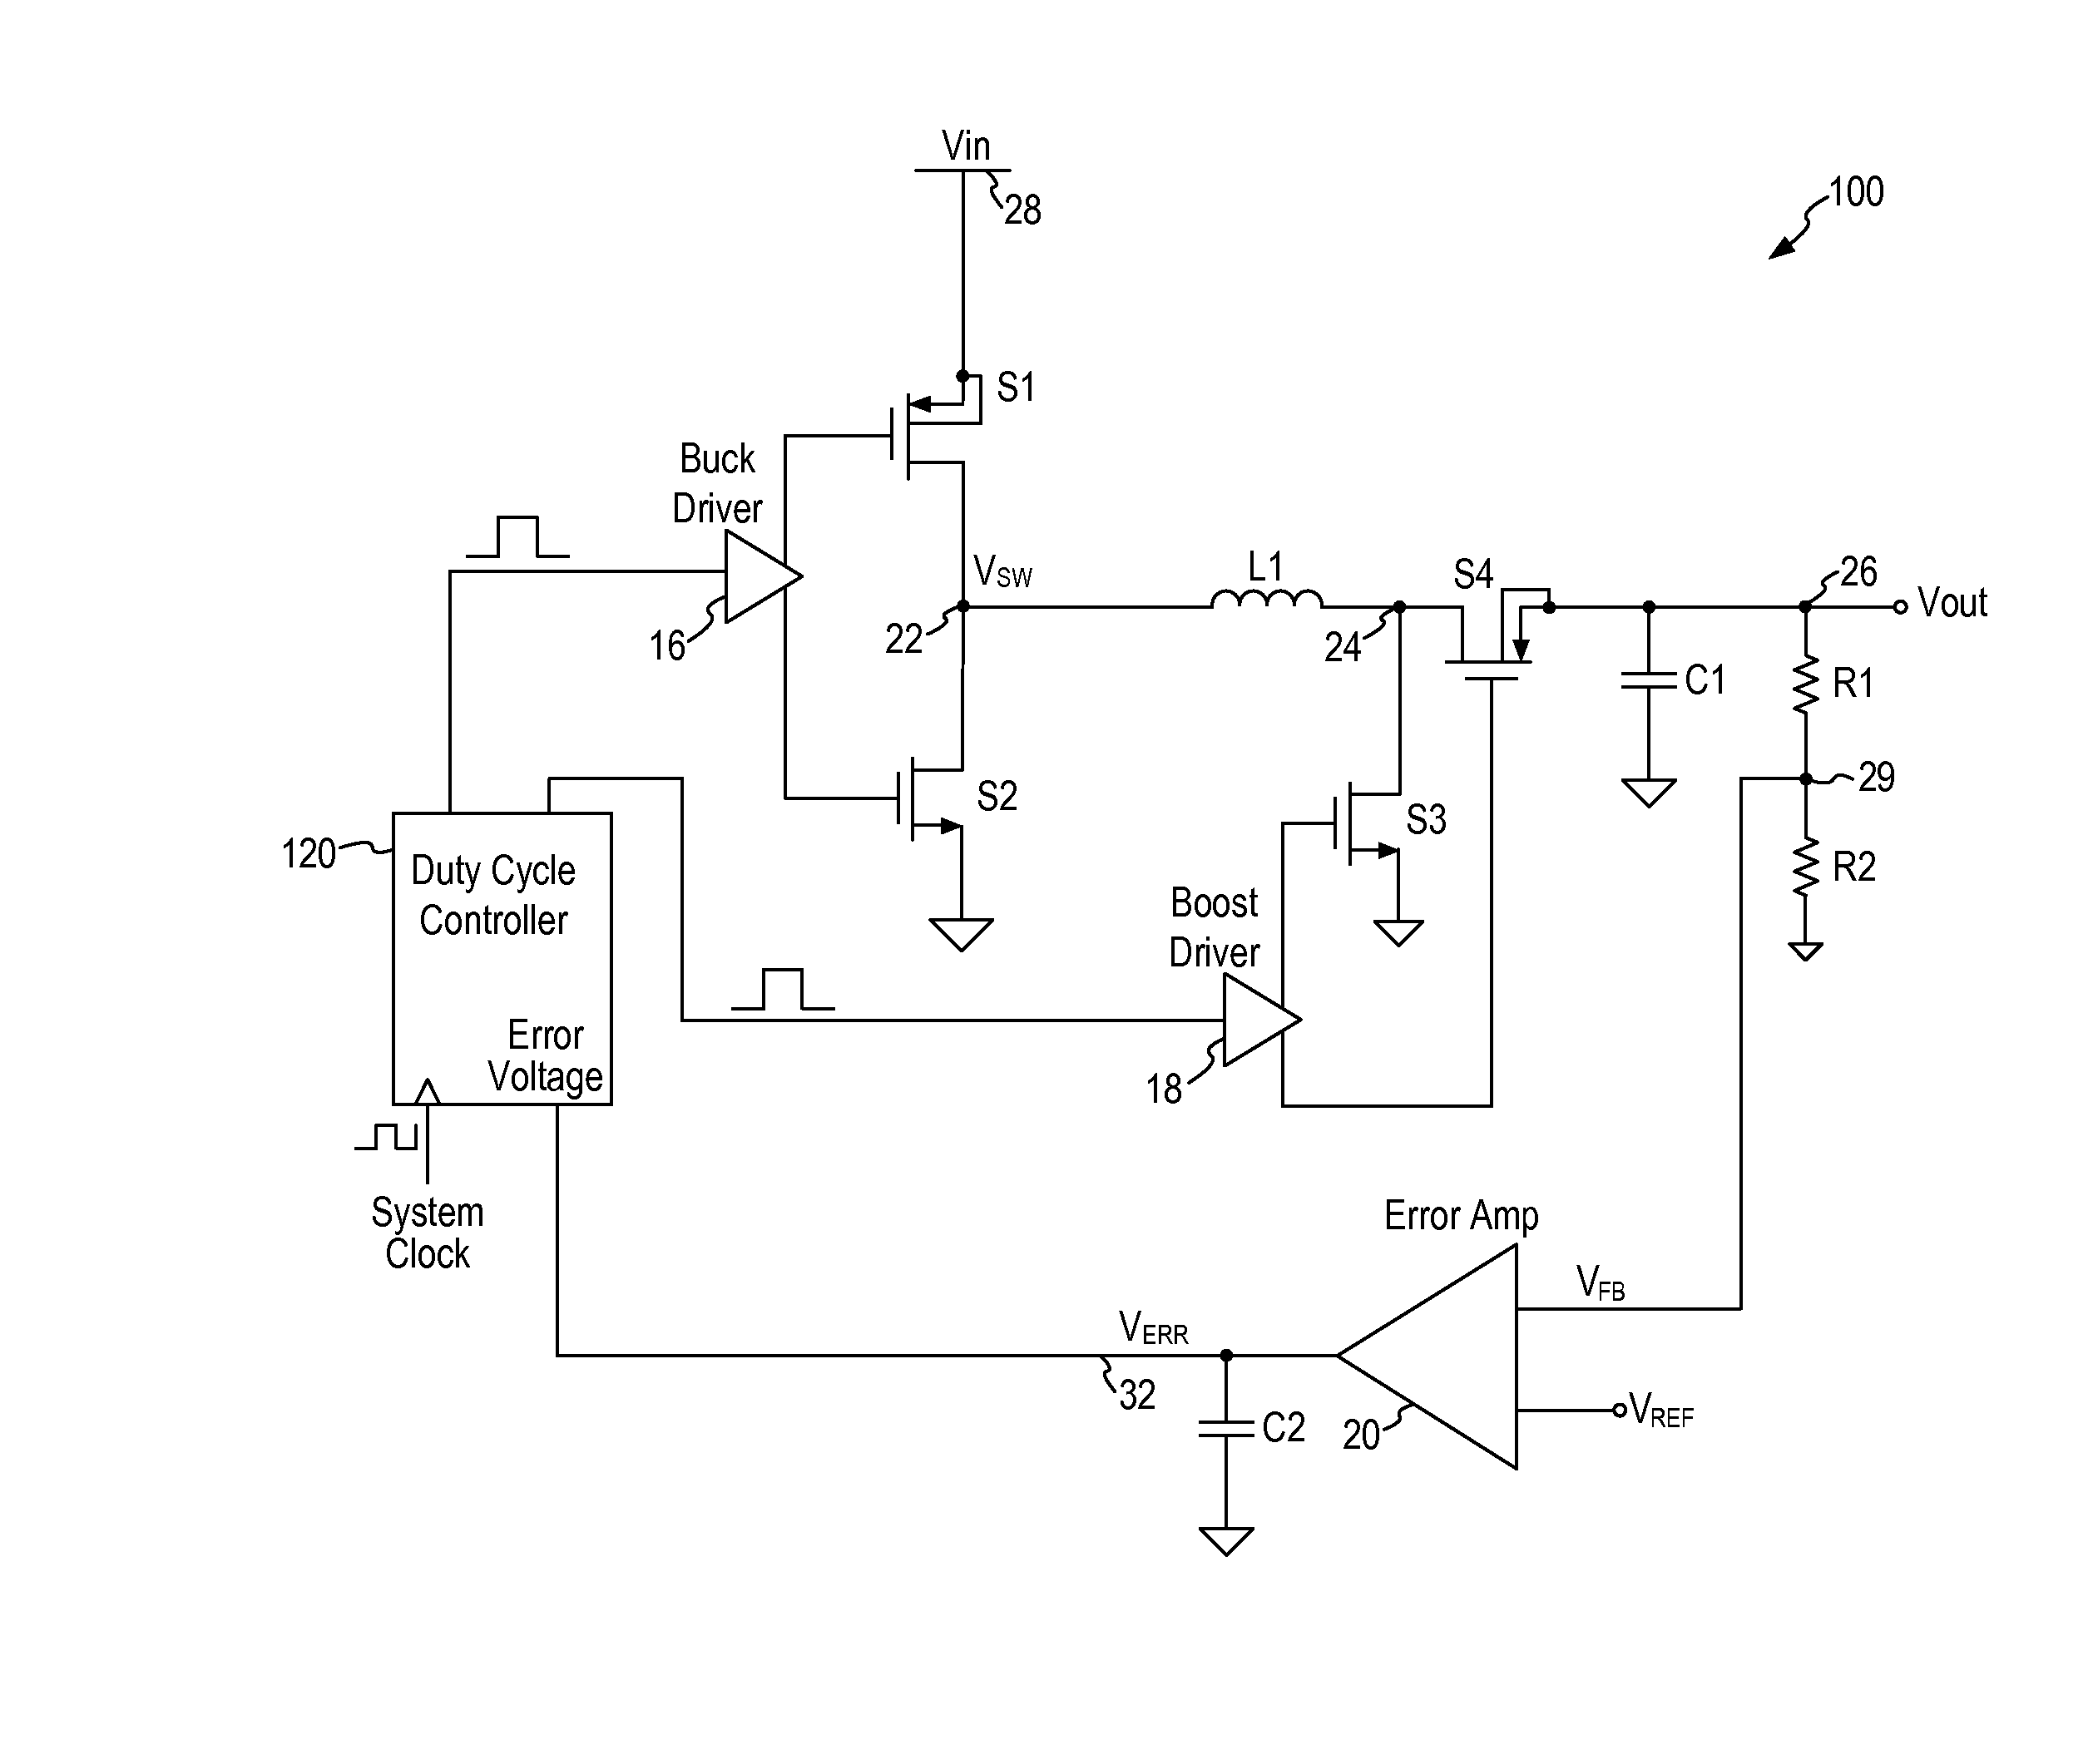 Buck-Boost Converter Using Timers for Mode Transition Control